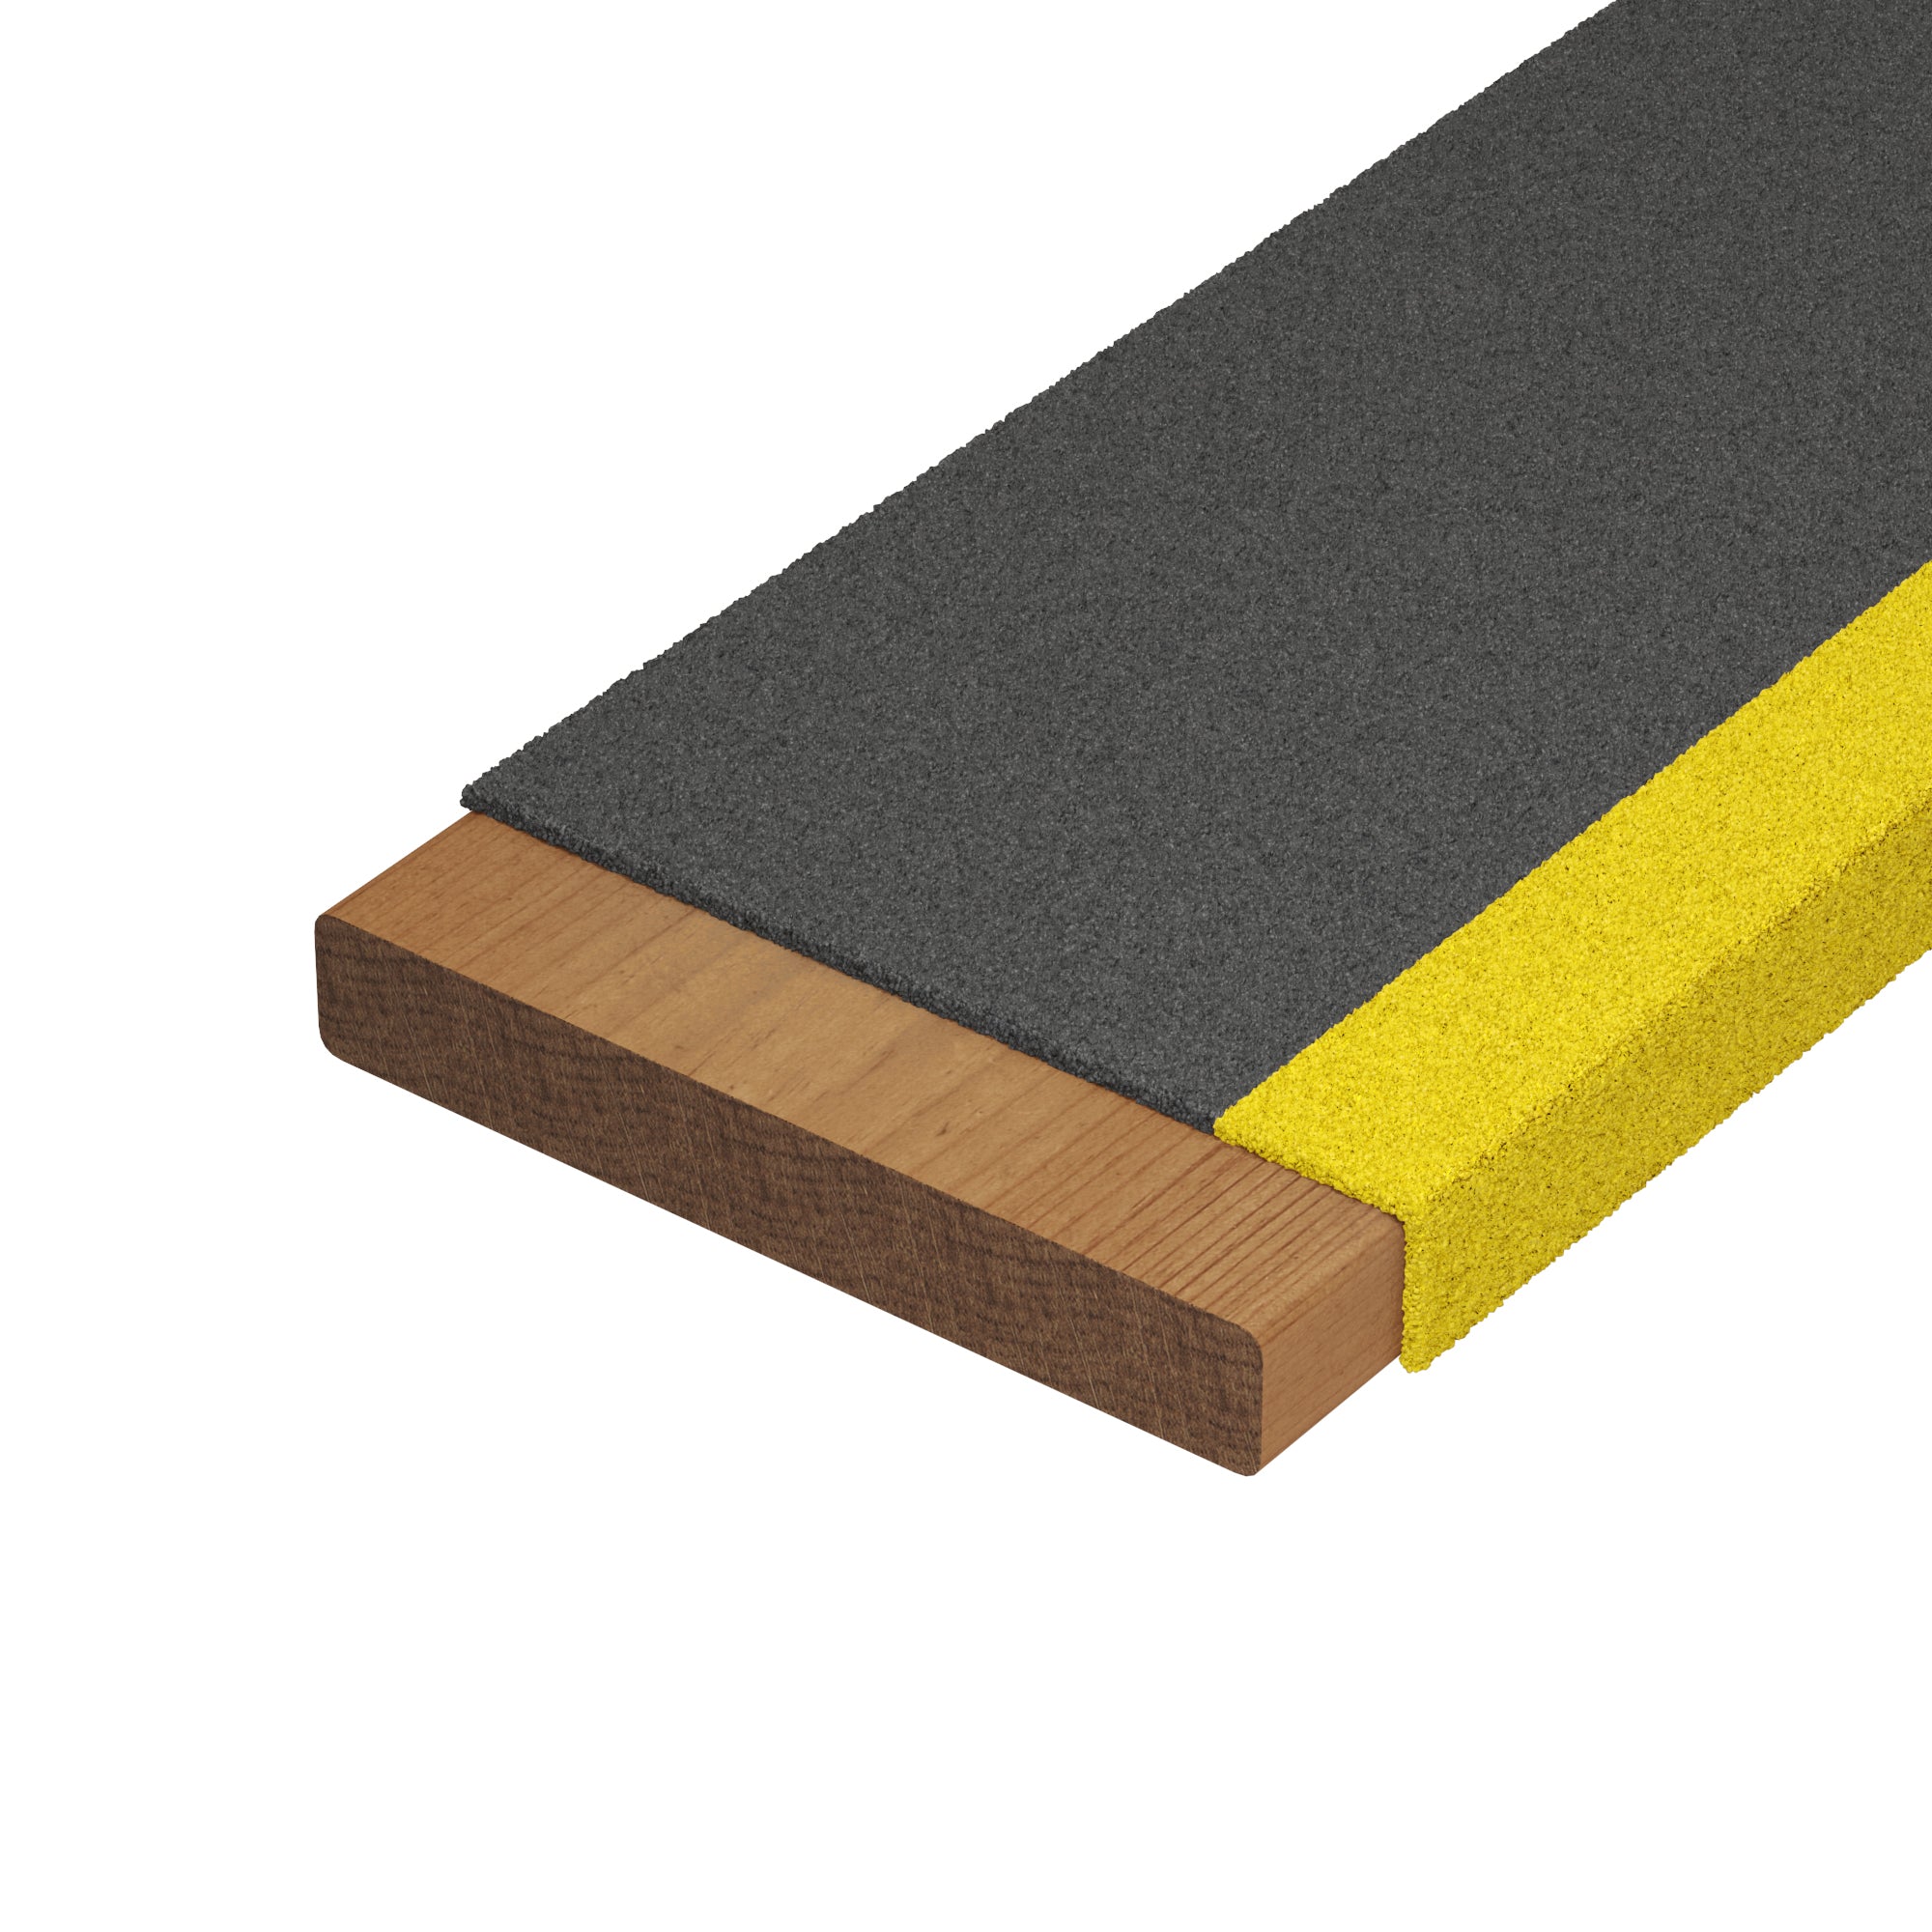 Anti-Slip FRP Stair Tread Cover - Black with Yellow Nosing